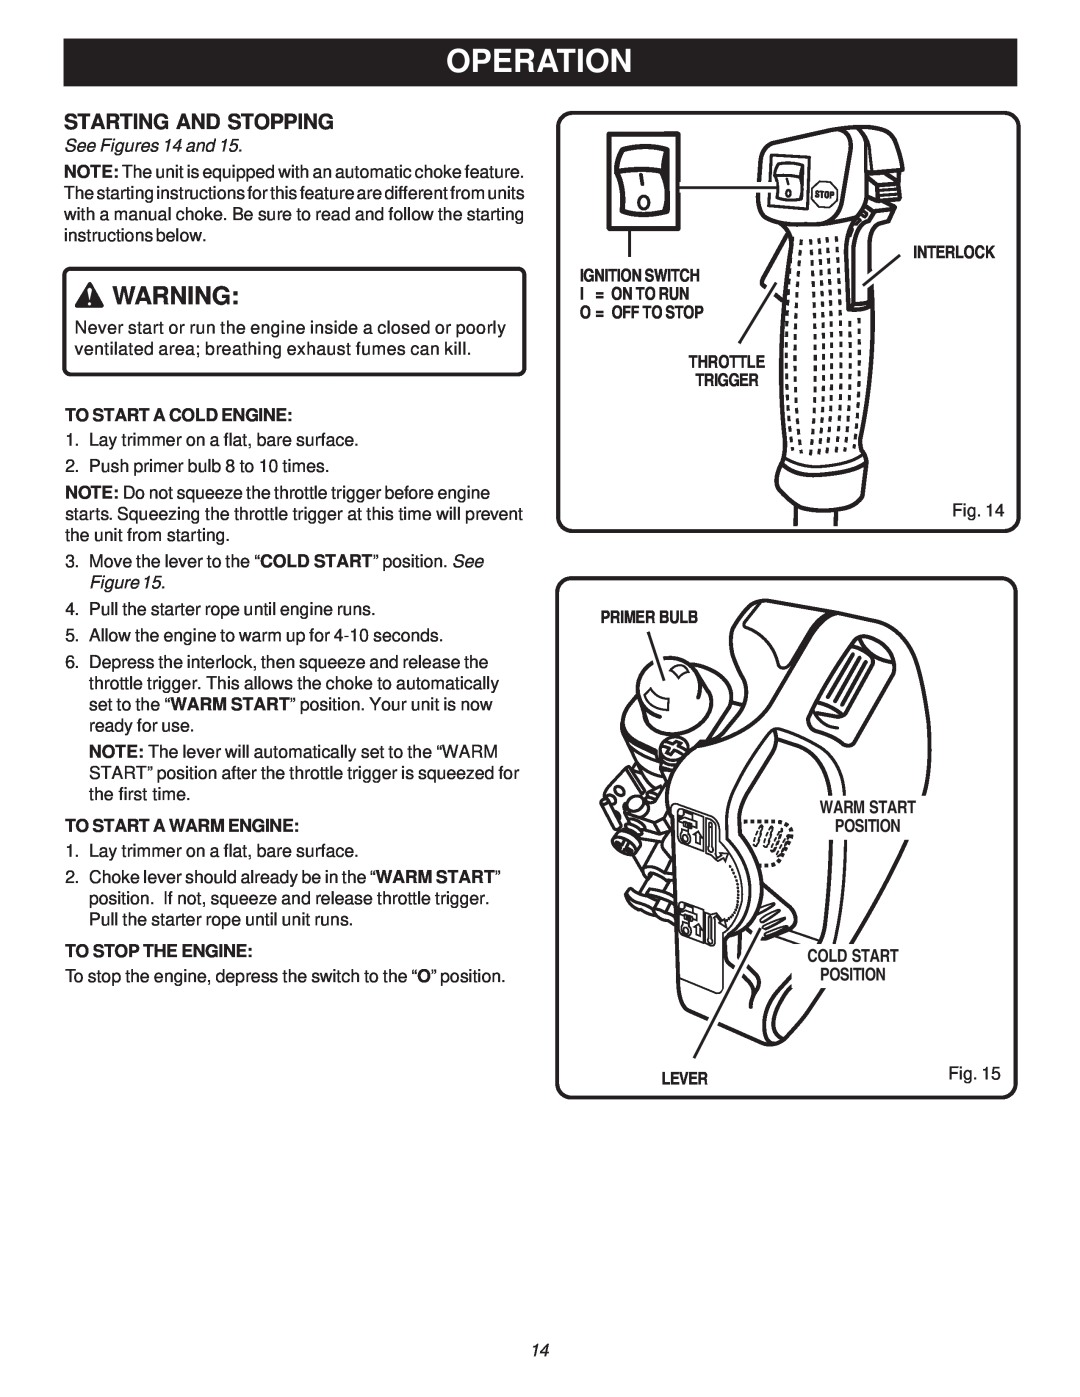 Ryobi Outdoor RY70107A Starting And Stopping, See Figures 14 and, To Start A Cold Engine, To Start A Warm Engine, Lever 